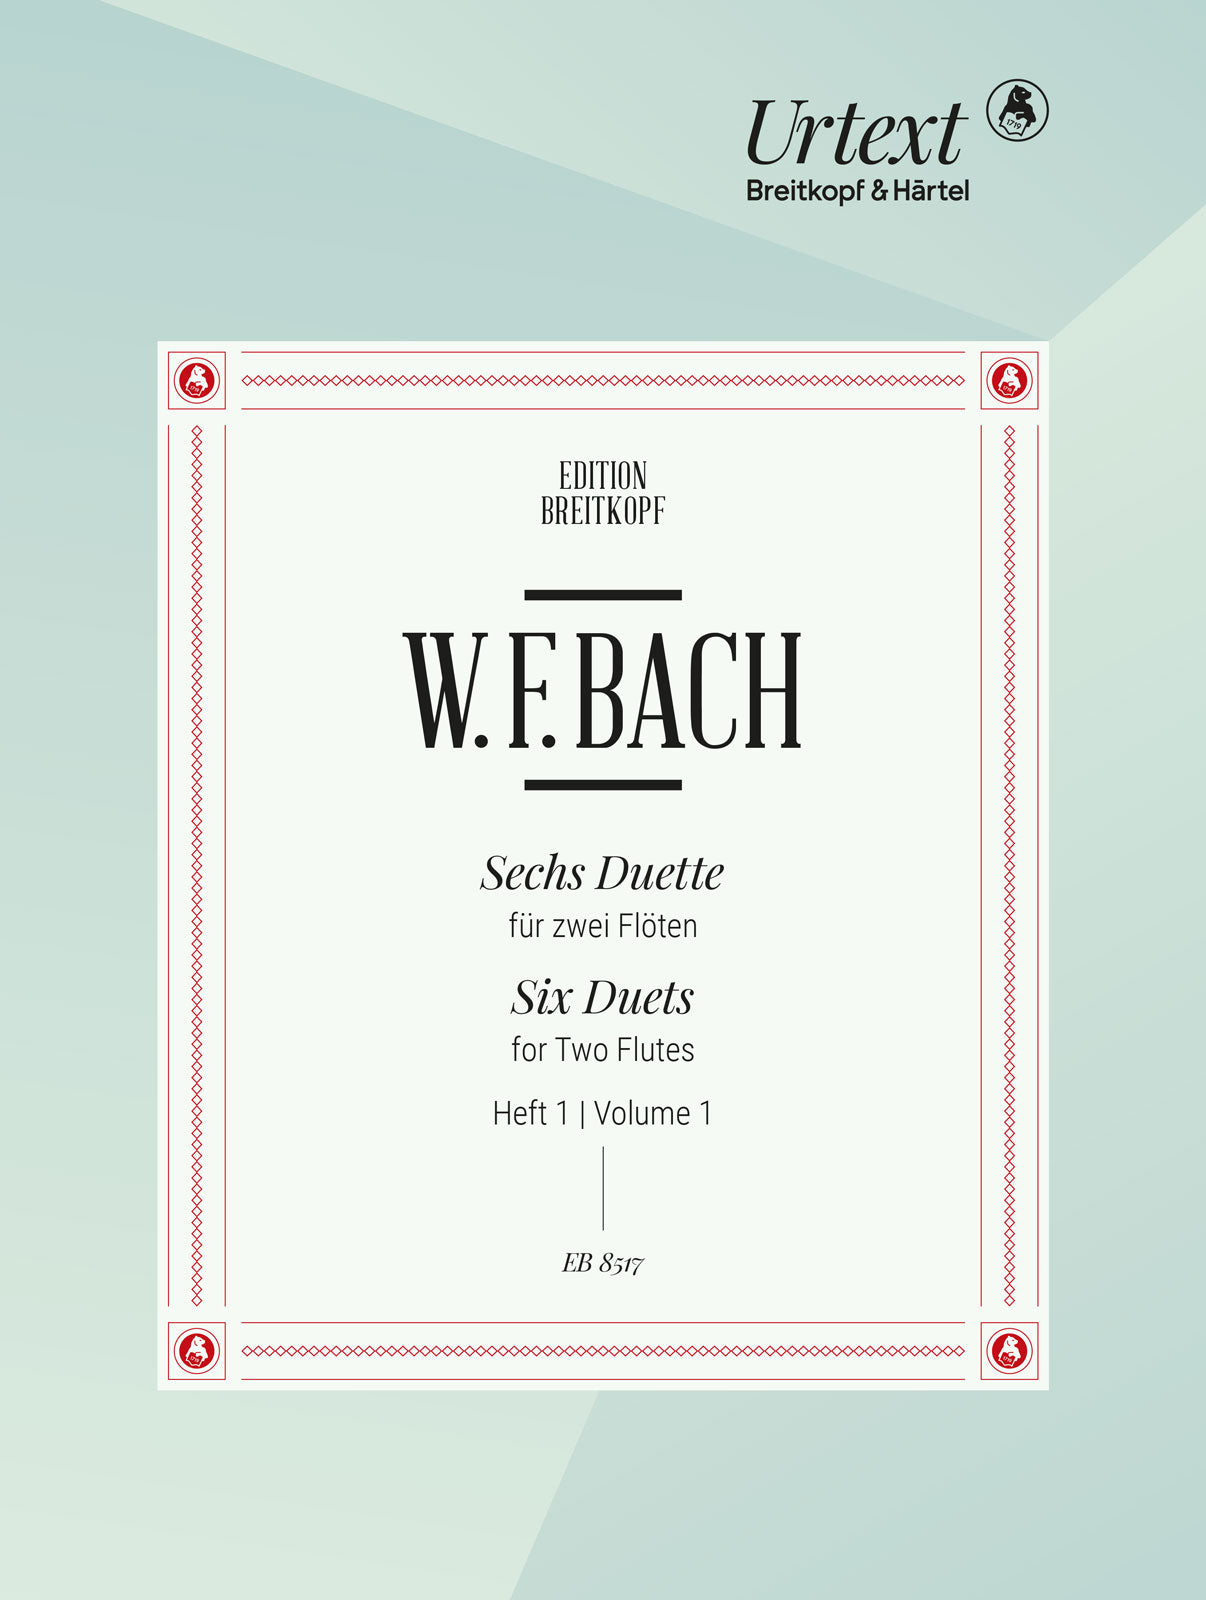 W. F. Bach: 6 Duets for Two Flutes - Volume 1 (Nos. 1-3)